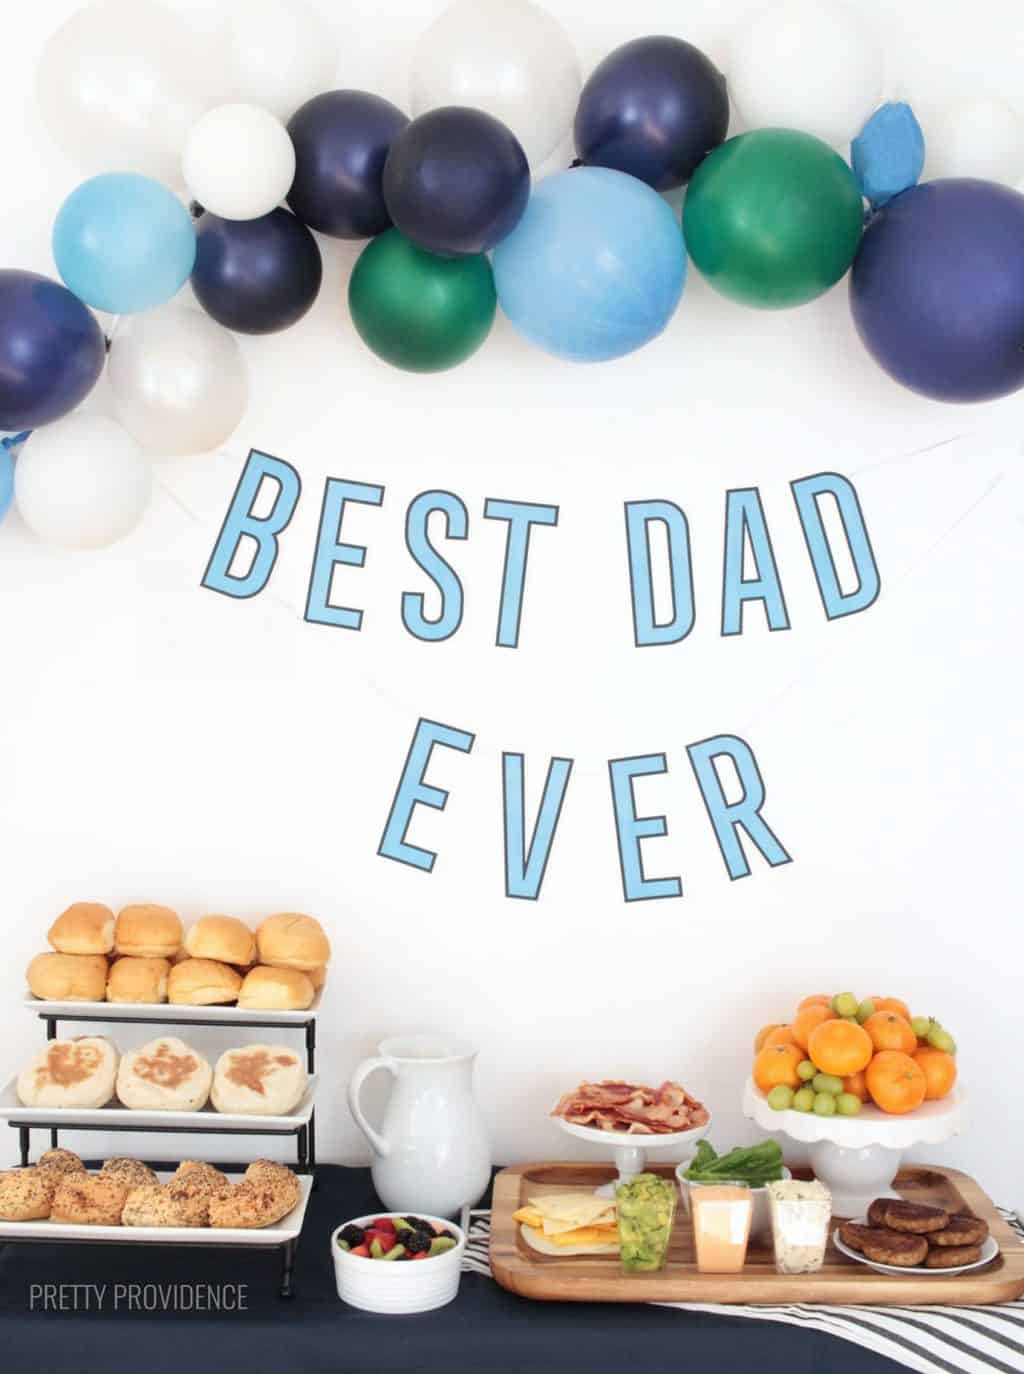 Father's Day breakfast table with breakfast sandwich ingredients, balloons and free printable 'best dad ever' banner.